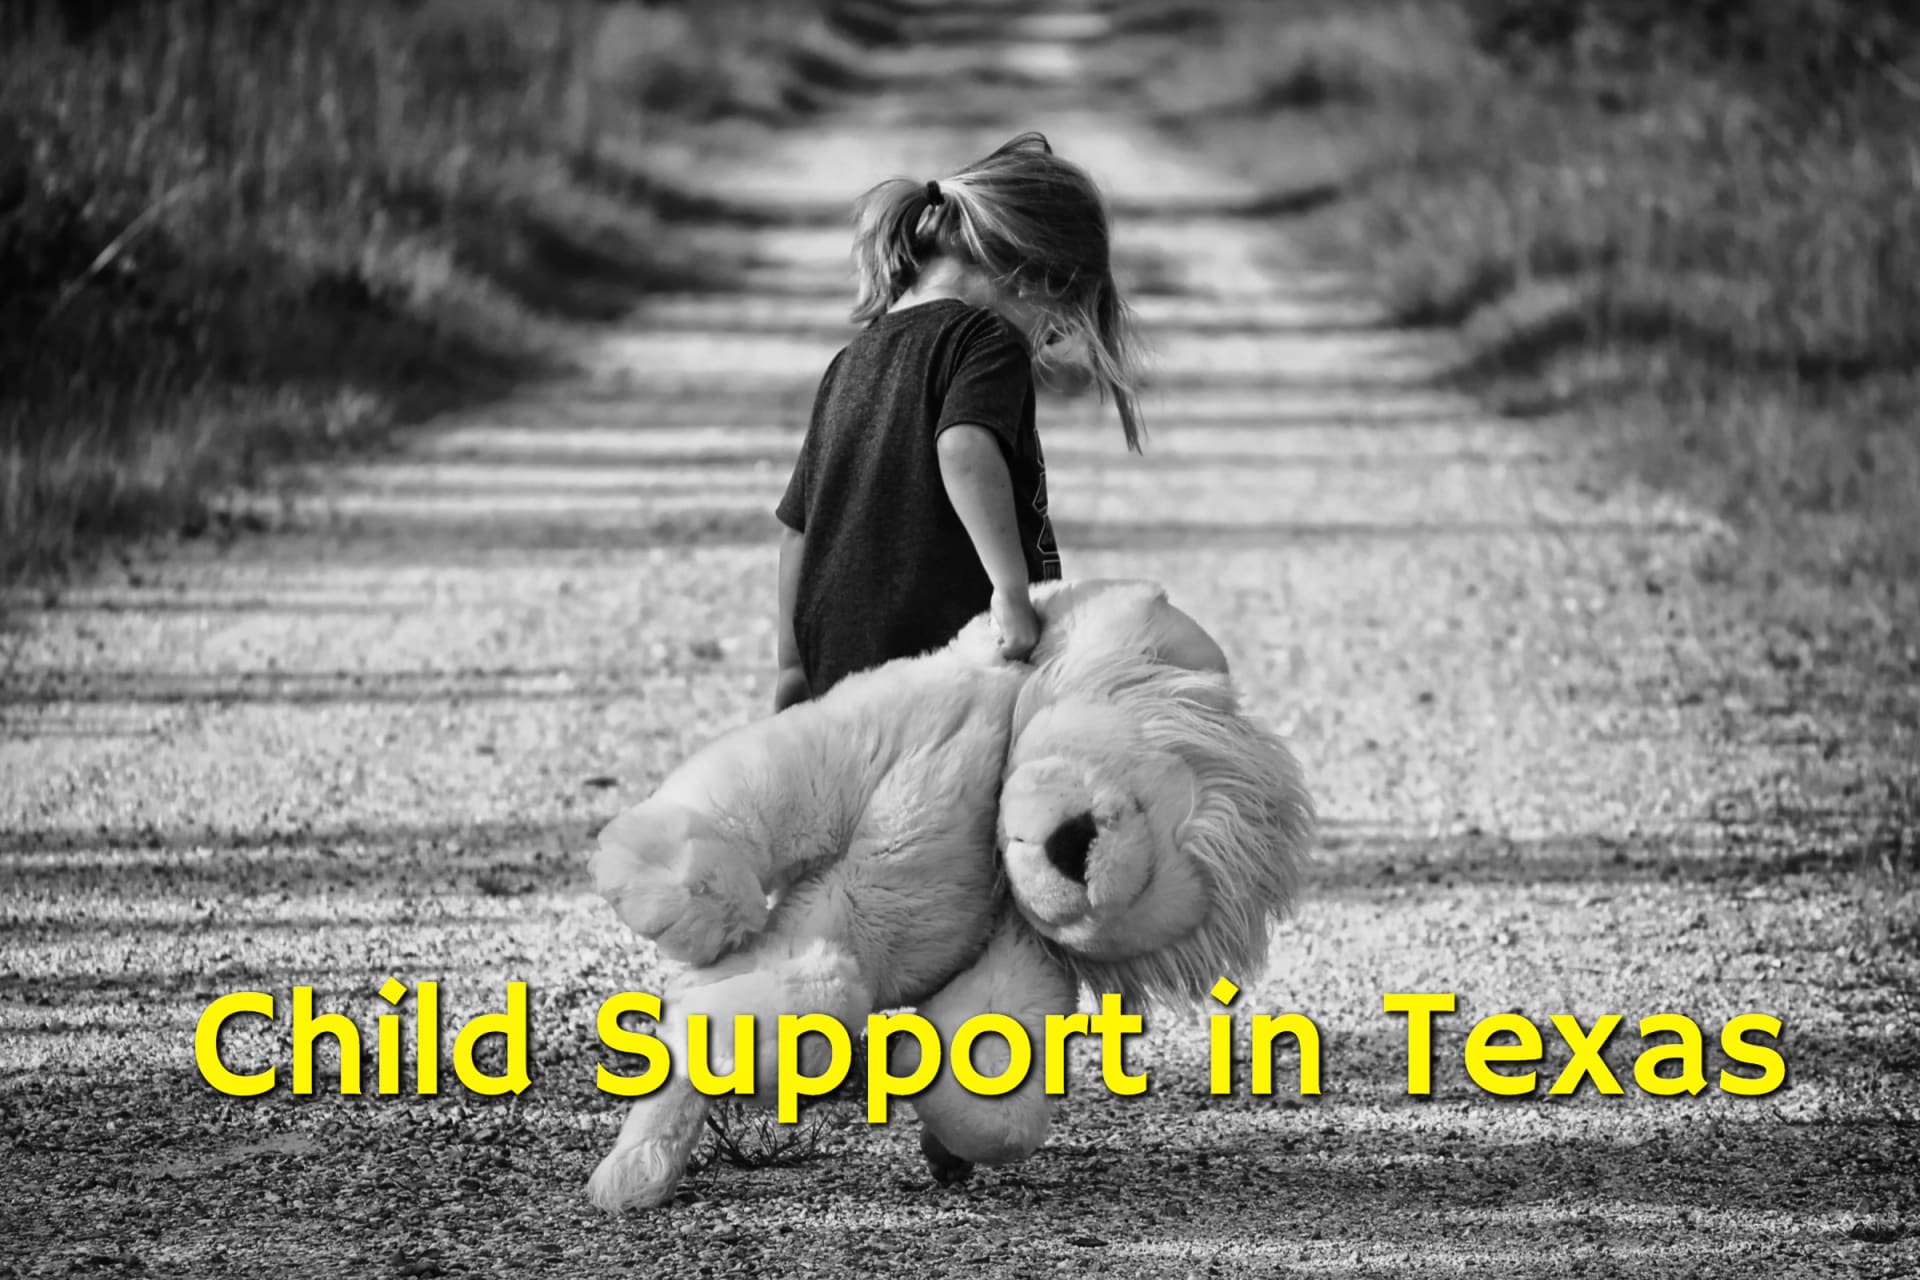 What Do I Need to Know about Child Support in Texas?